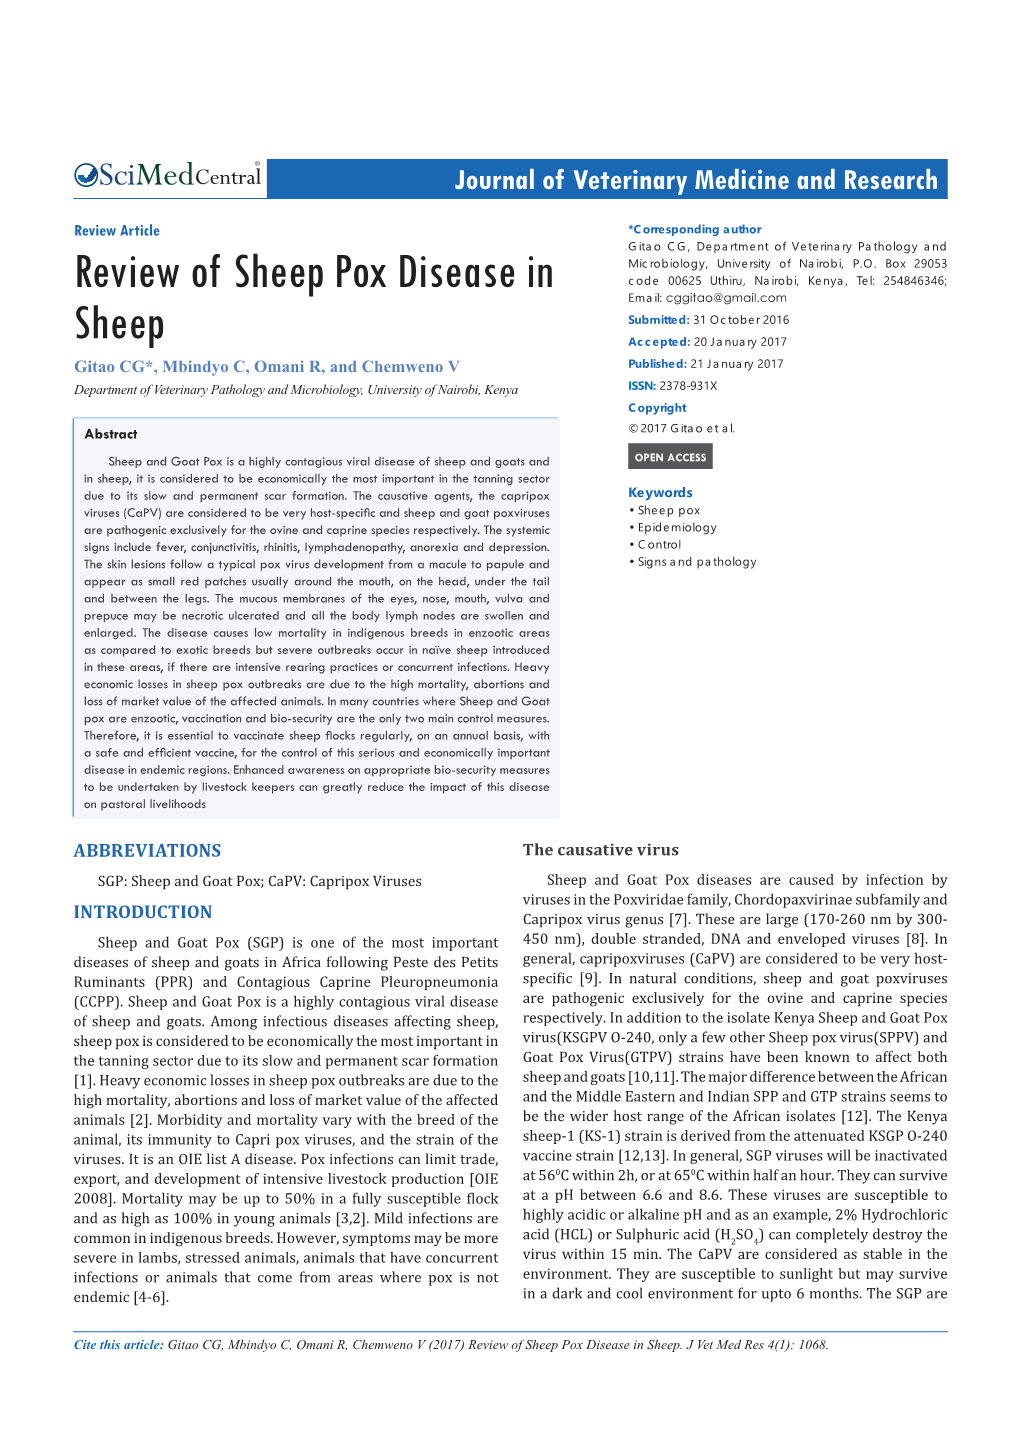 Review of Sheep Pox Disease in Sheep